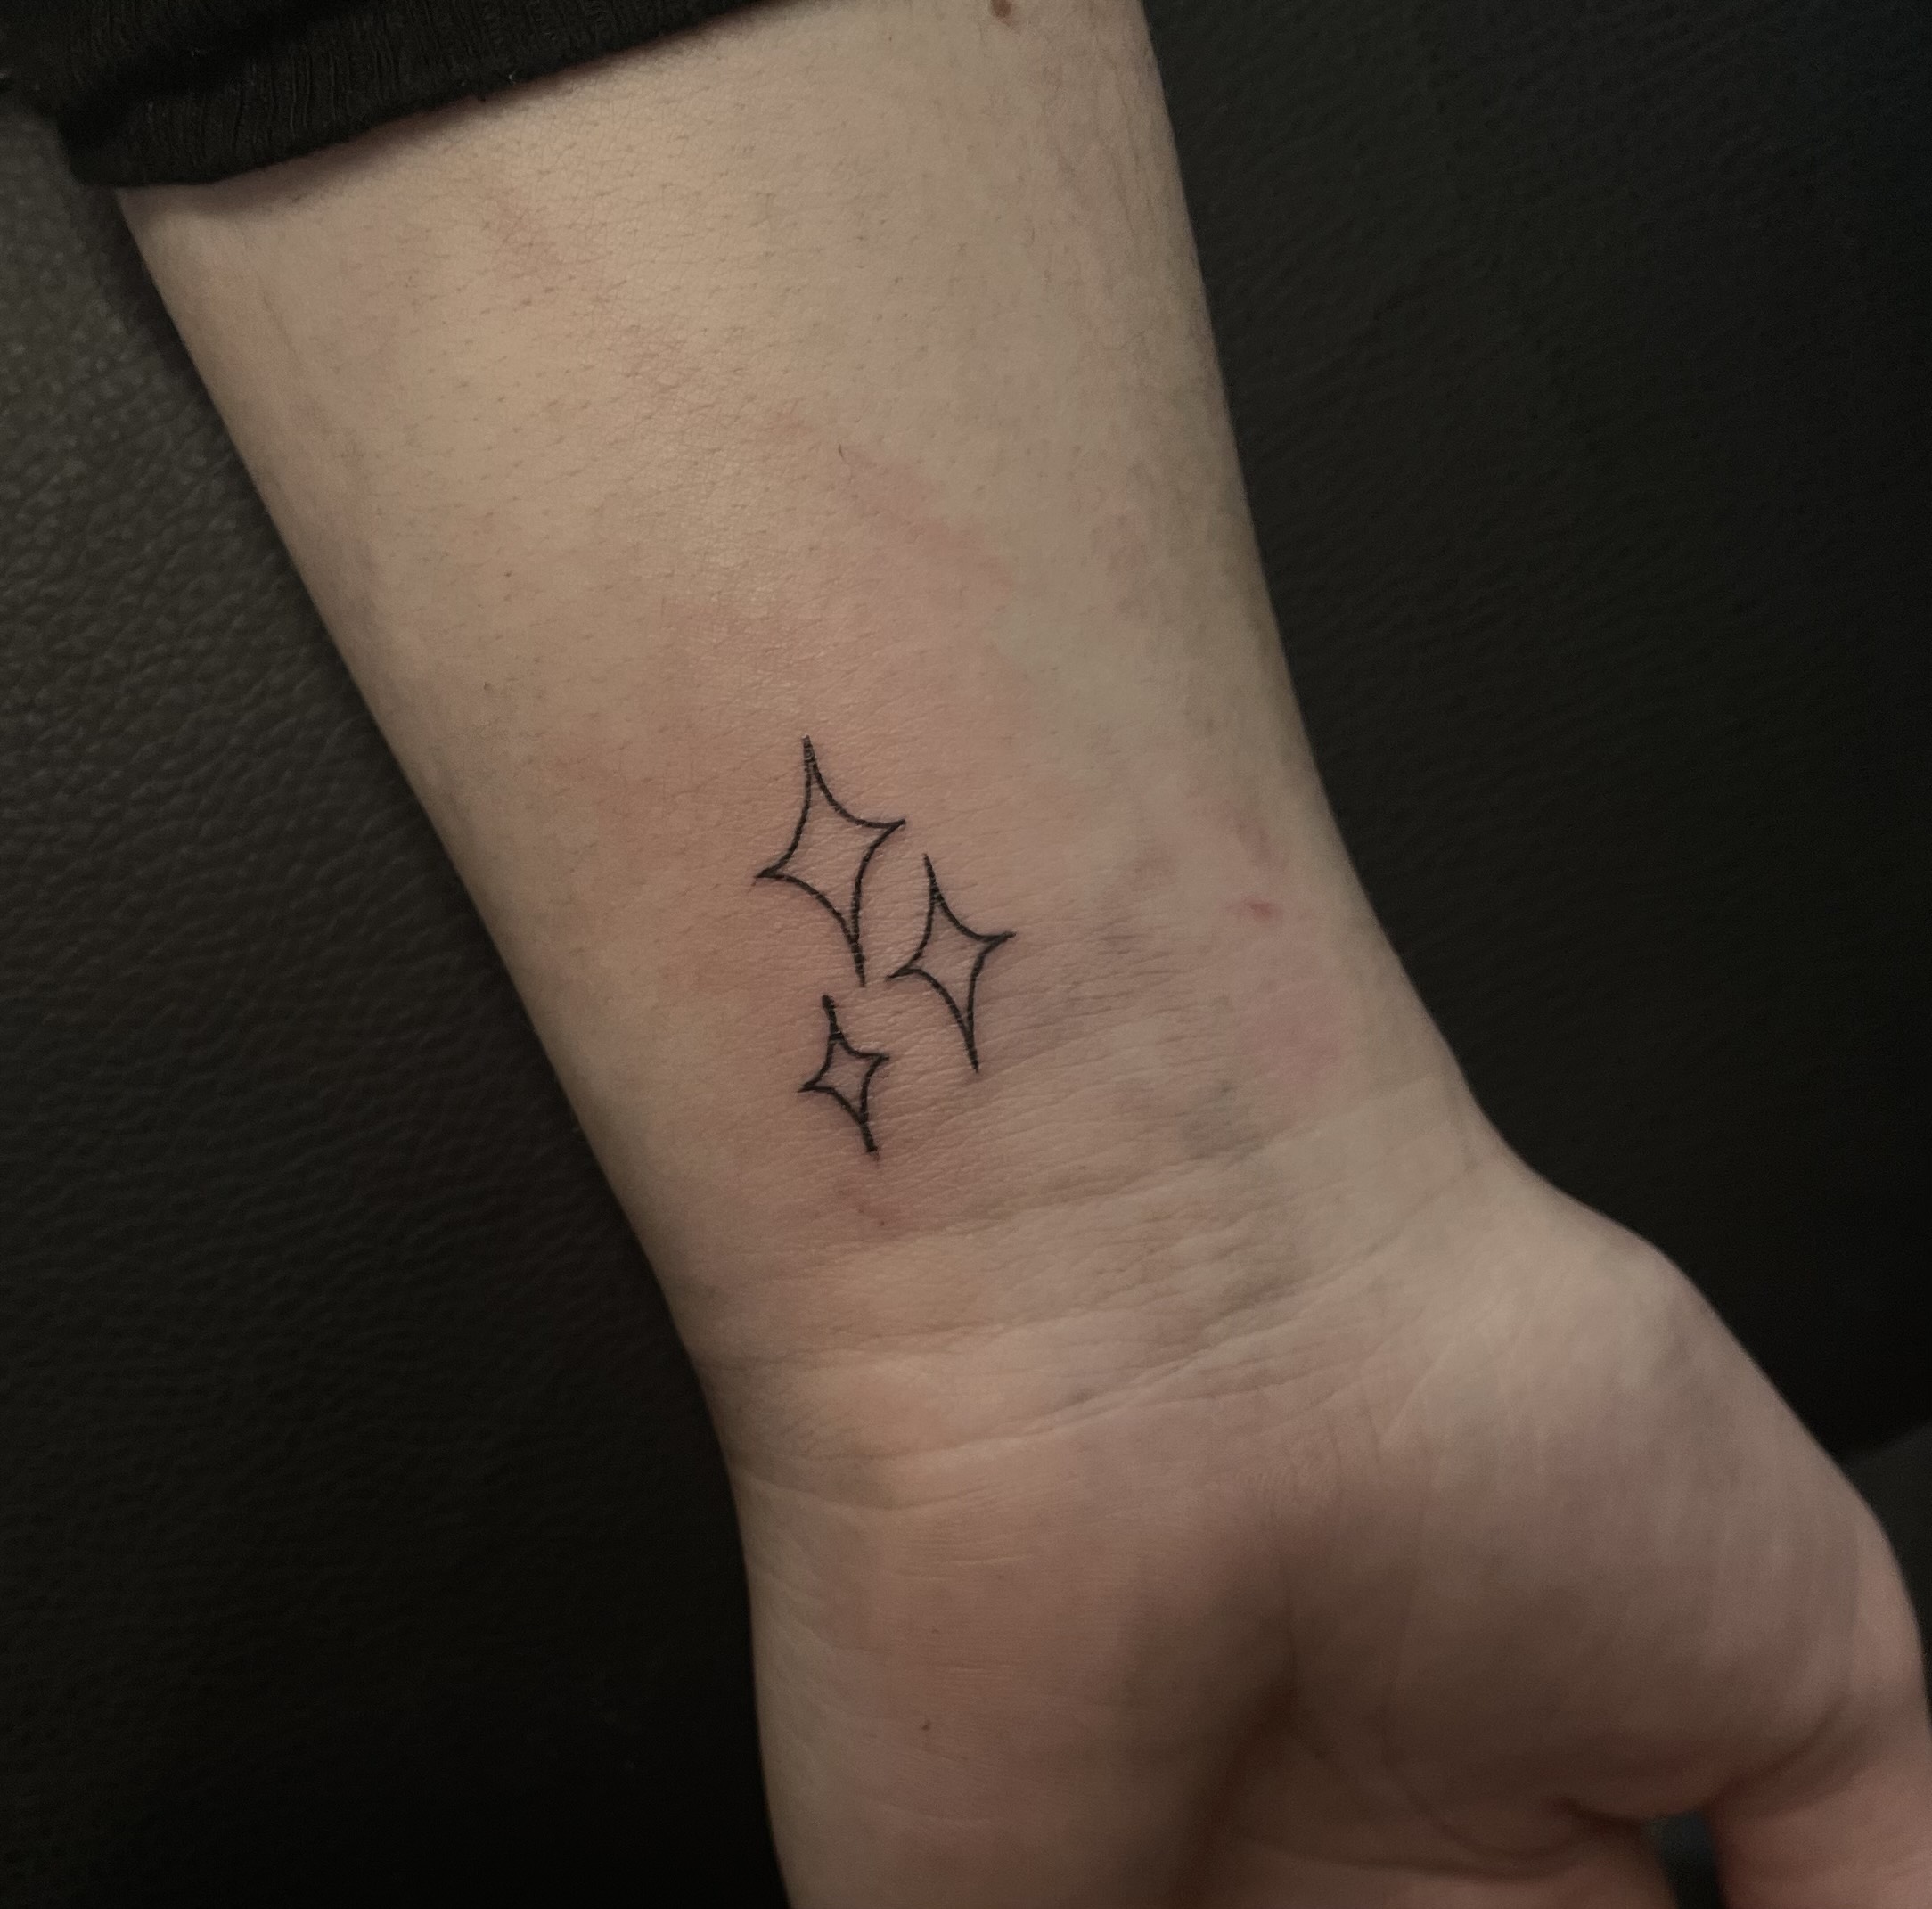 Image of a wrist with a fresh tattoo of three little stars in fineline style